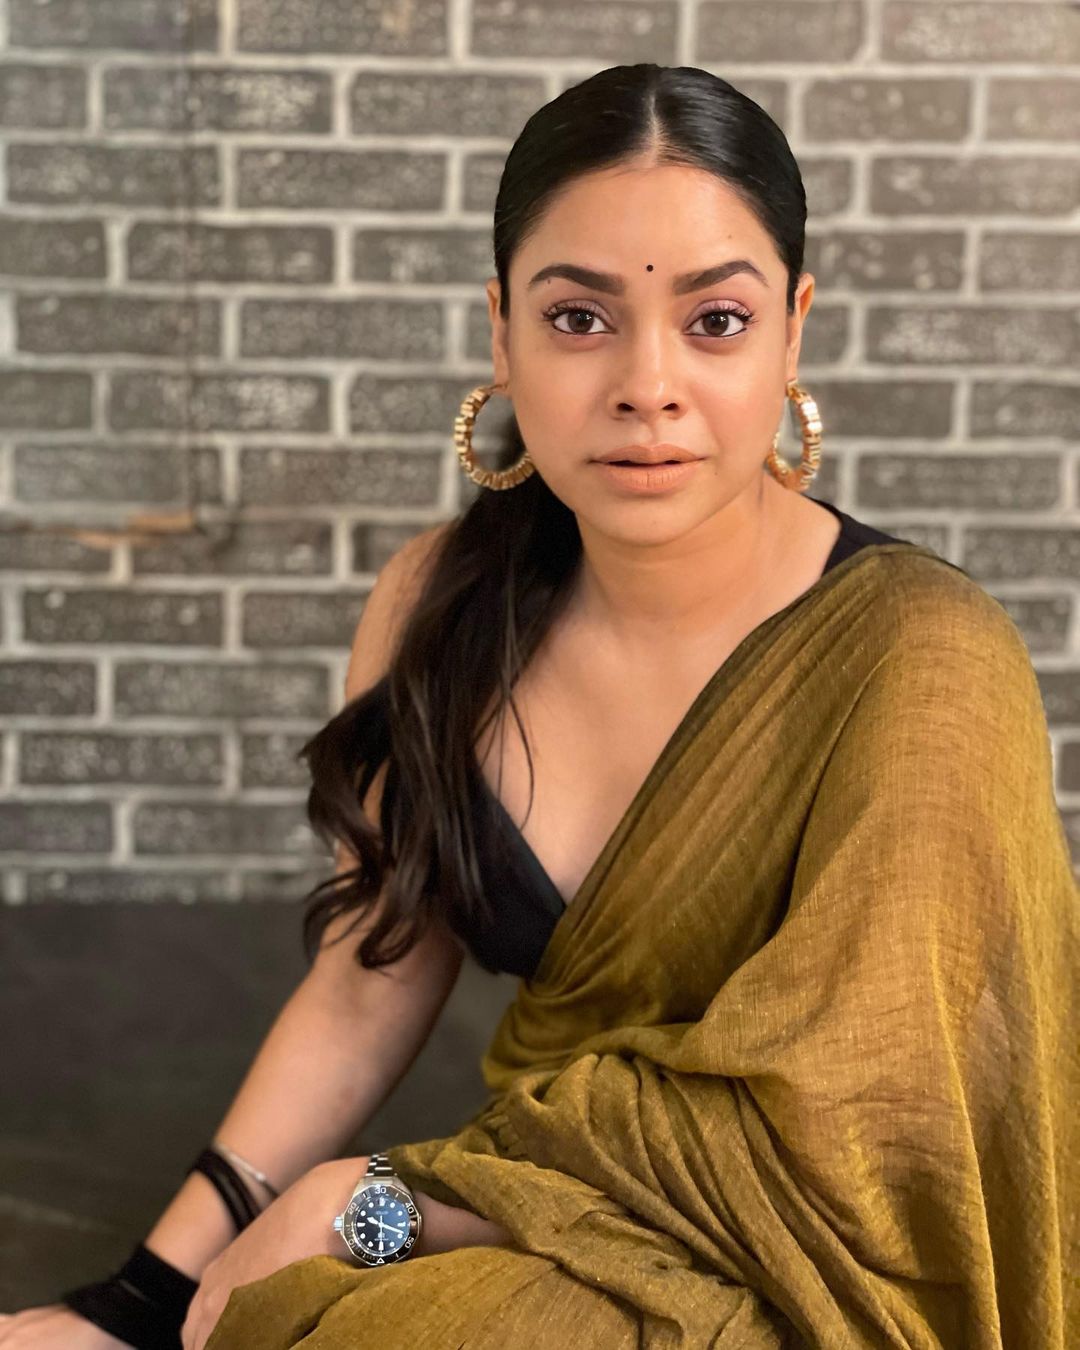 Why Actress Sumona Chakravarti Isn’t A Part Of The Great Indian Kapil Show? Check Out What The Khatron Ke Khiladi 14 Contestant Says!